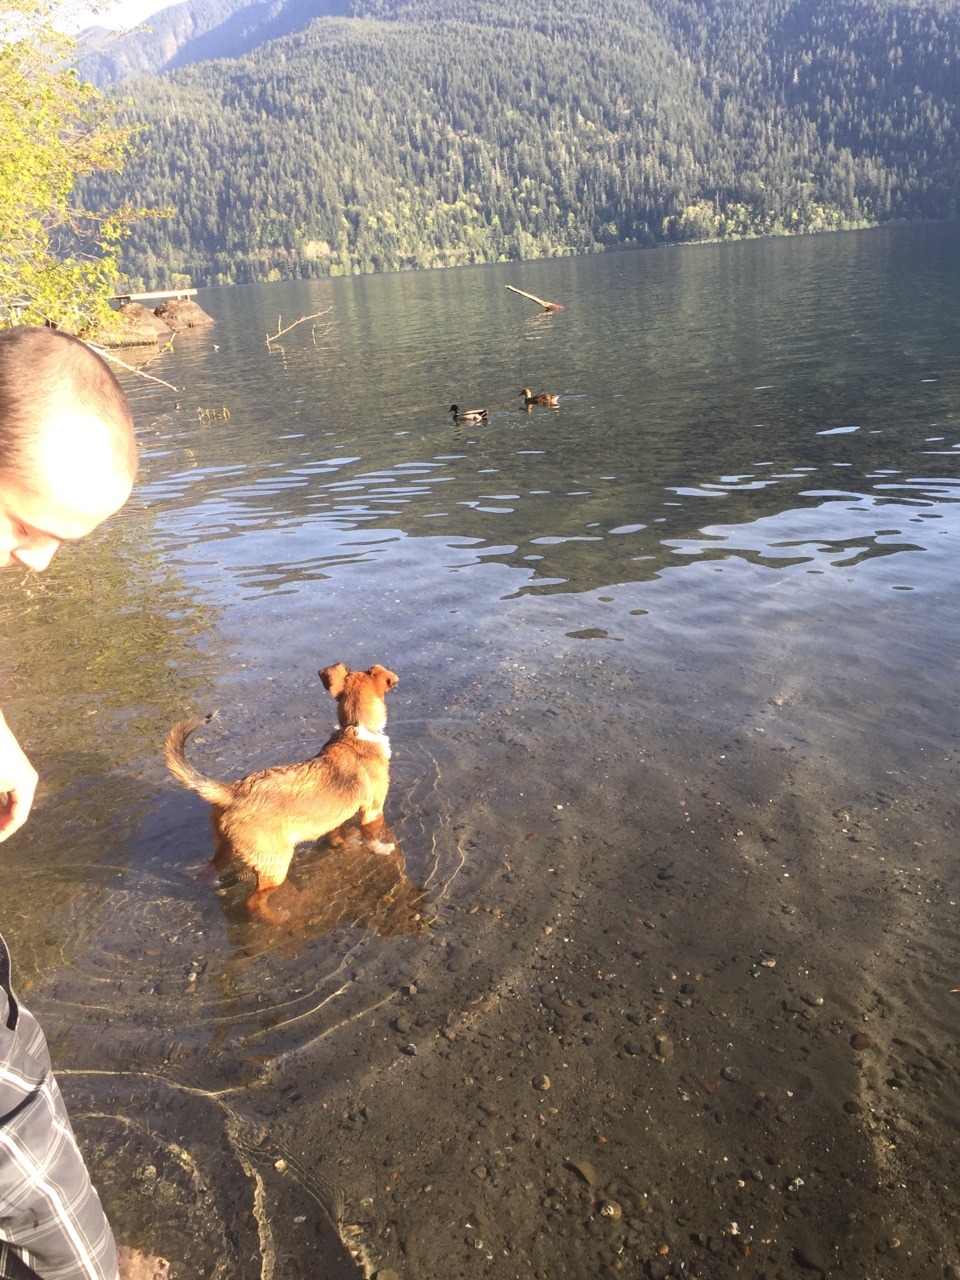 Puppies first trip to the lake, Freya tried to chase ducks it was pretty adorable